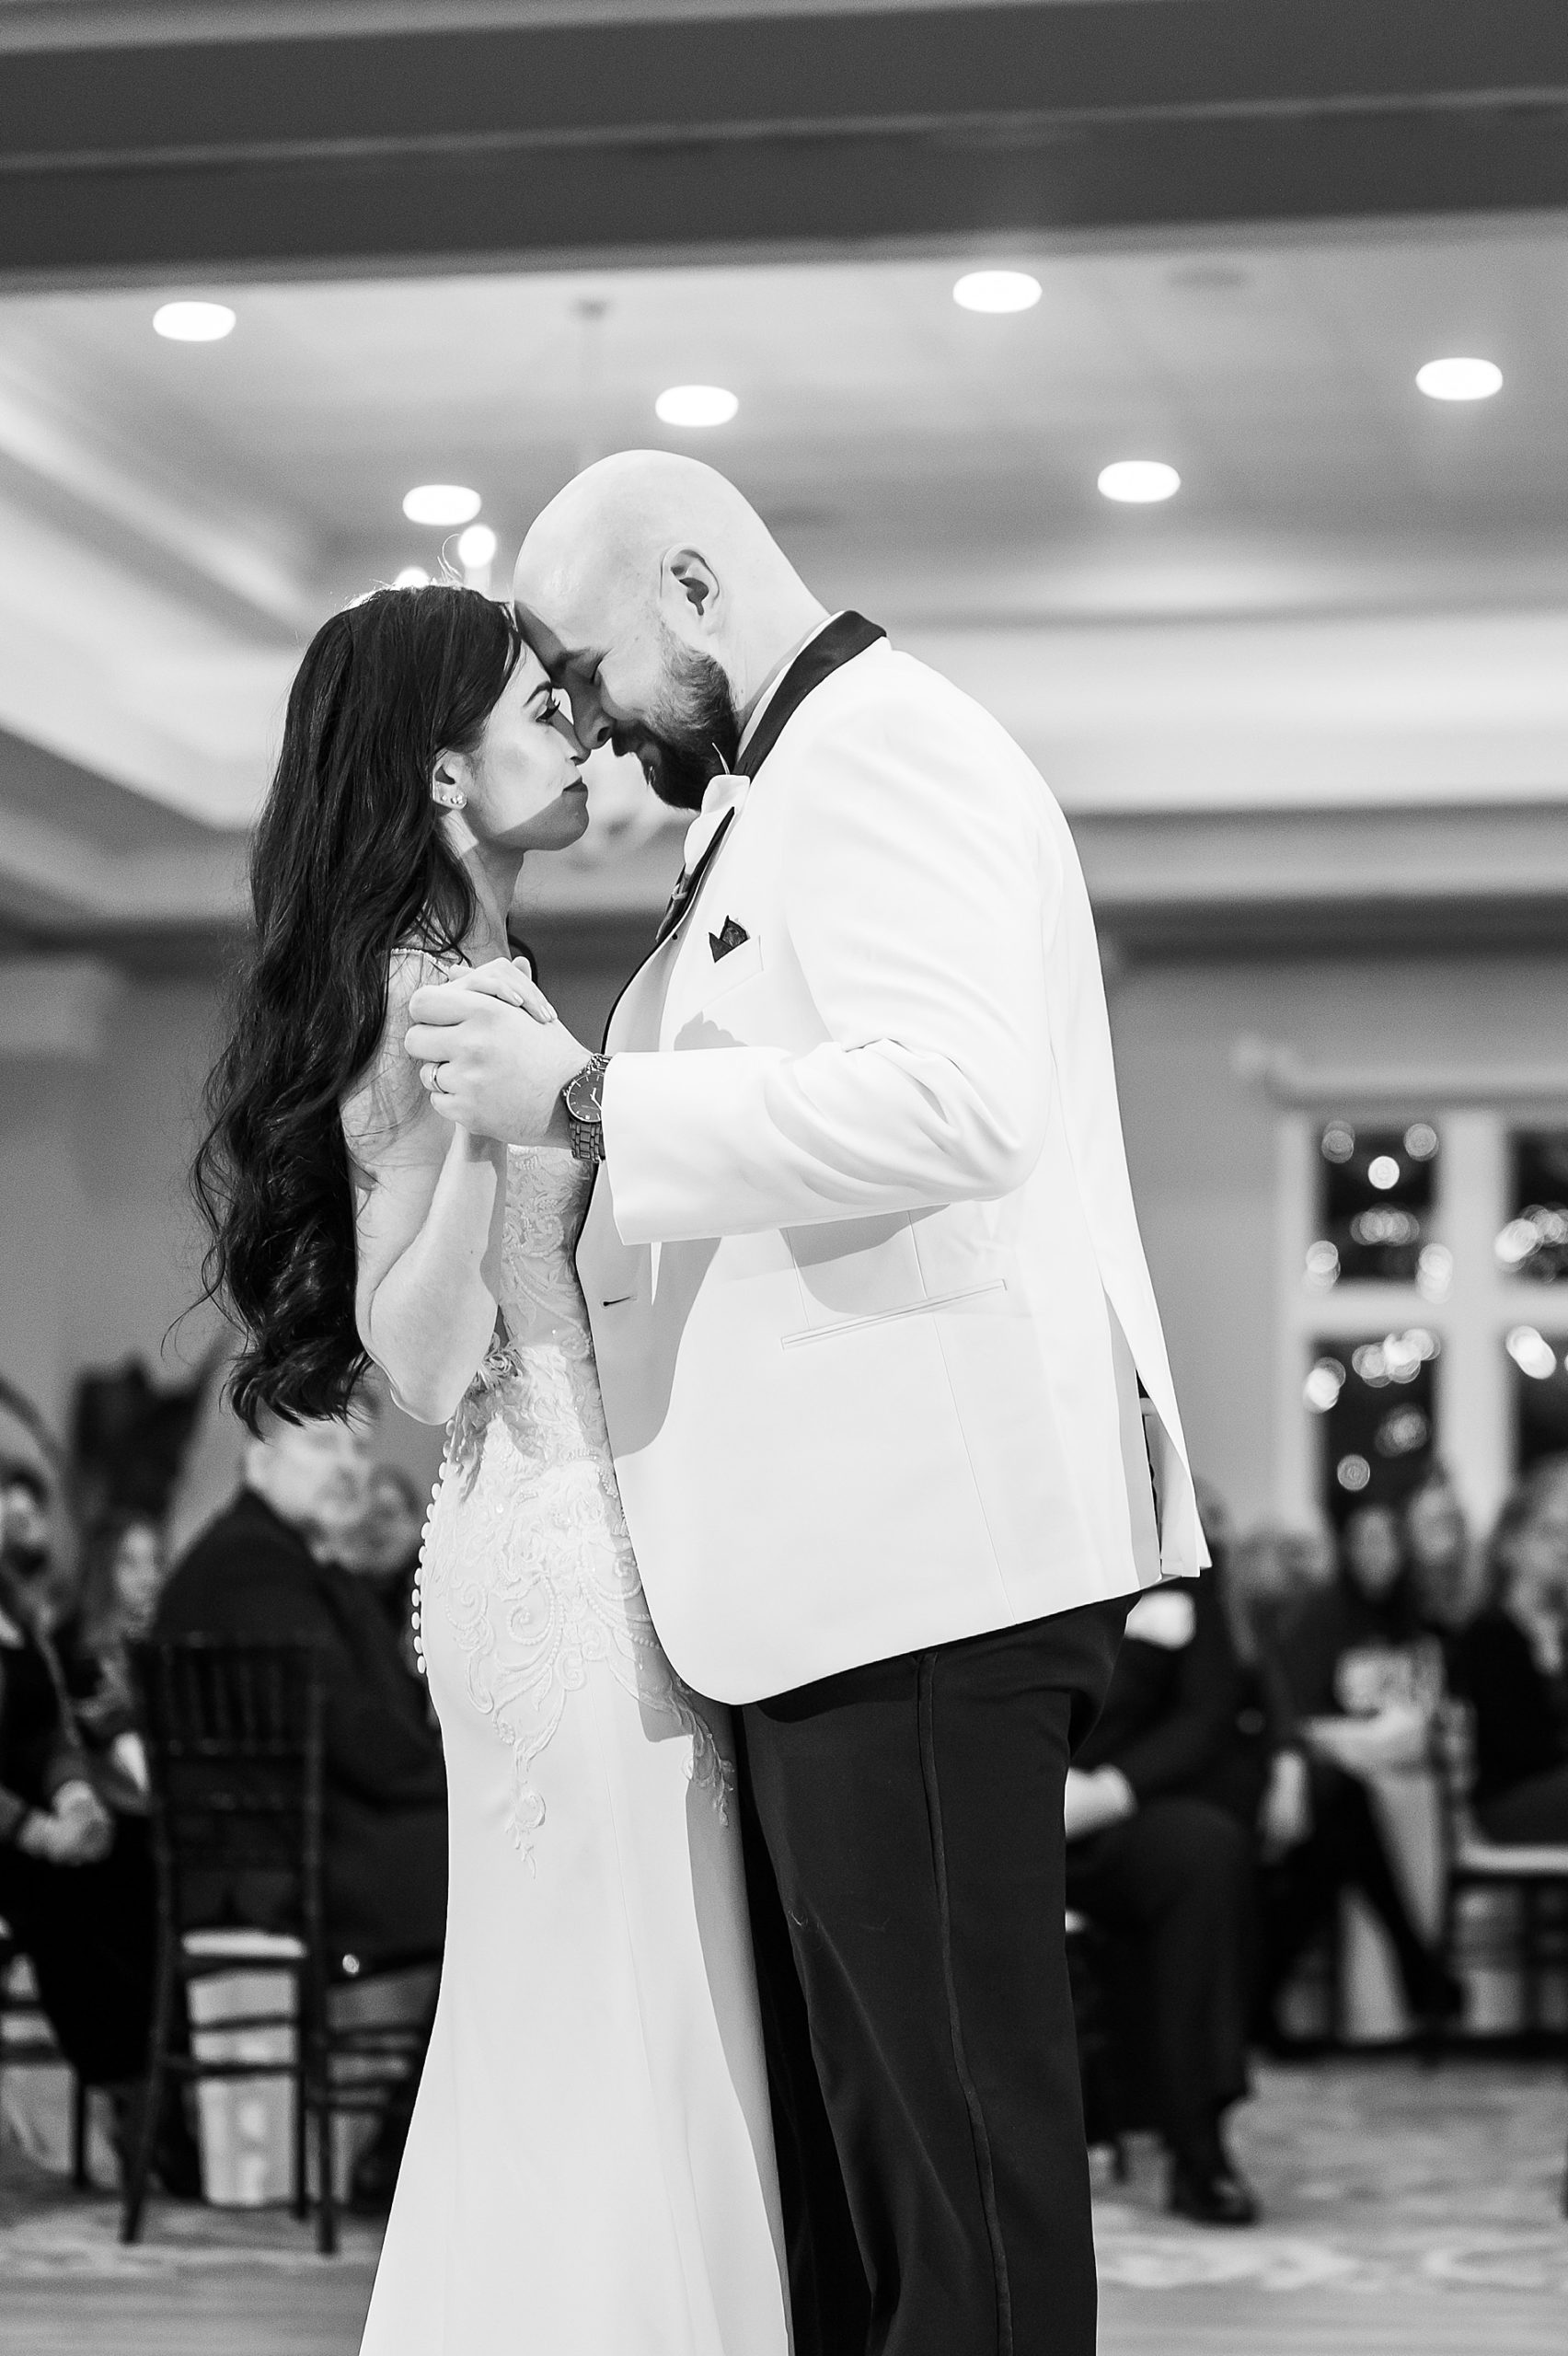 newlyweds share first dance together